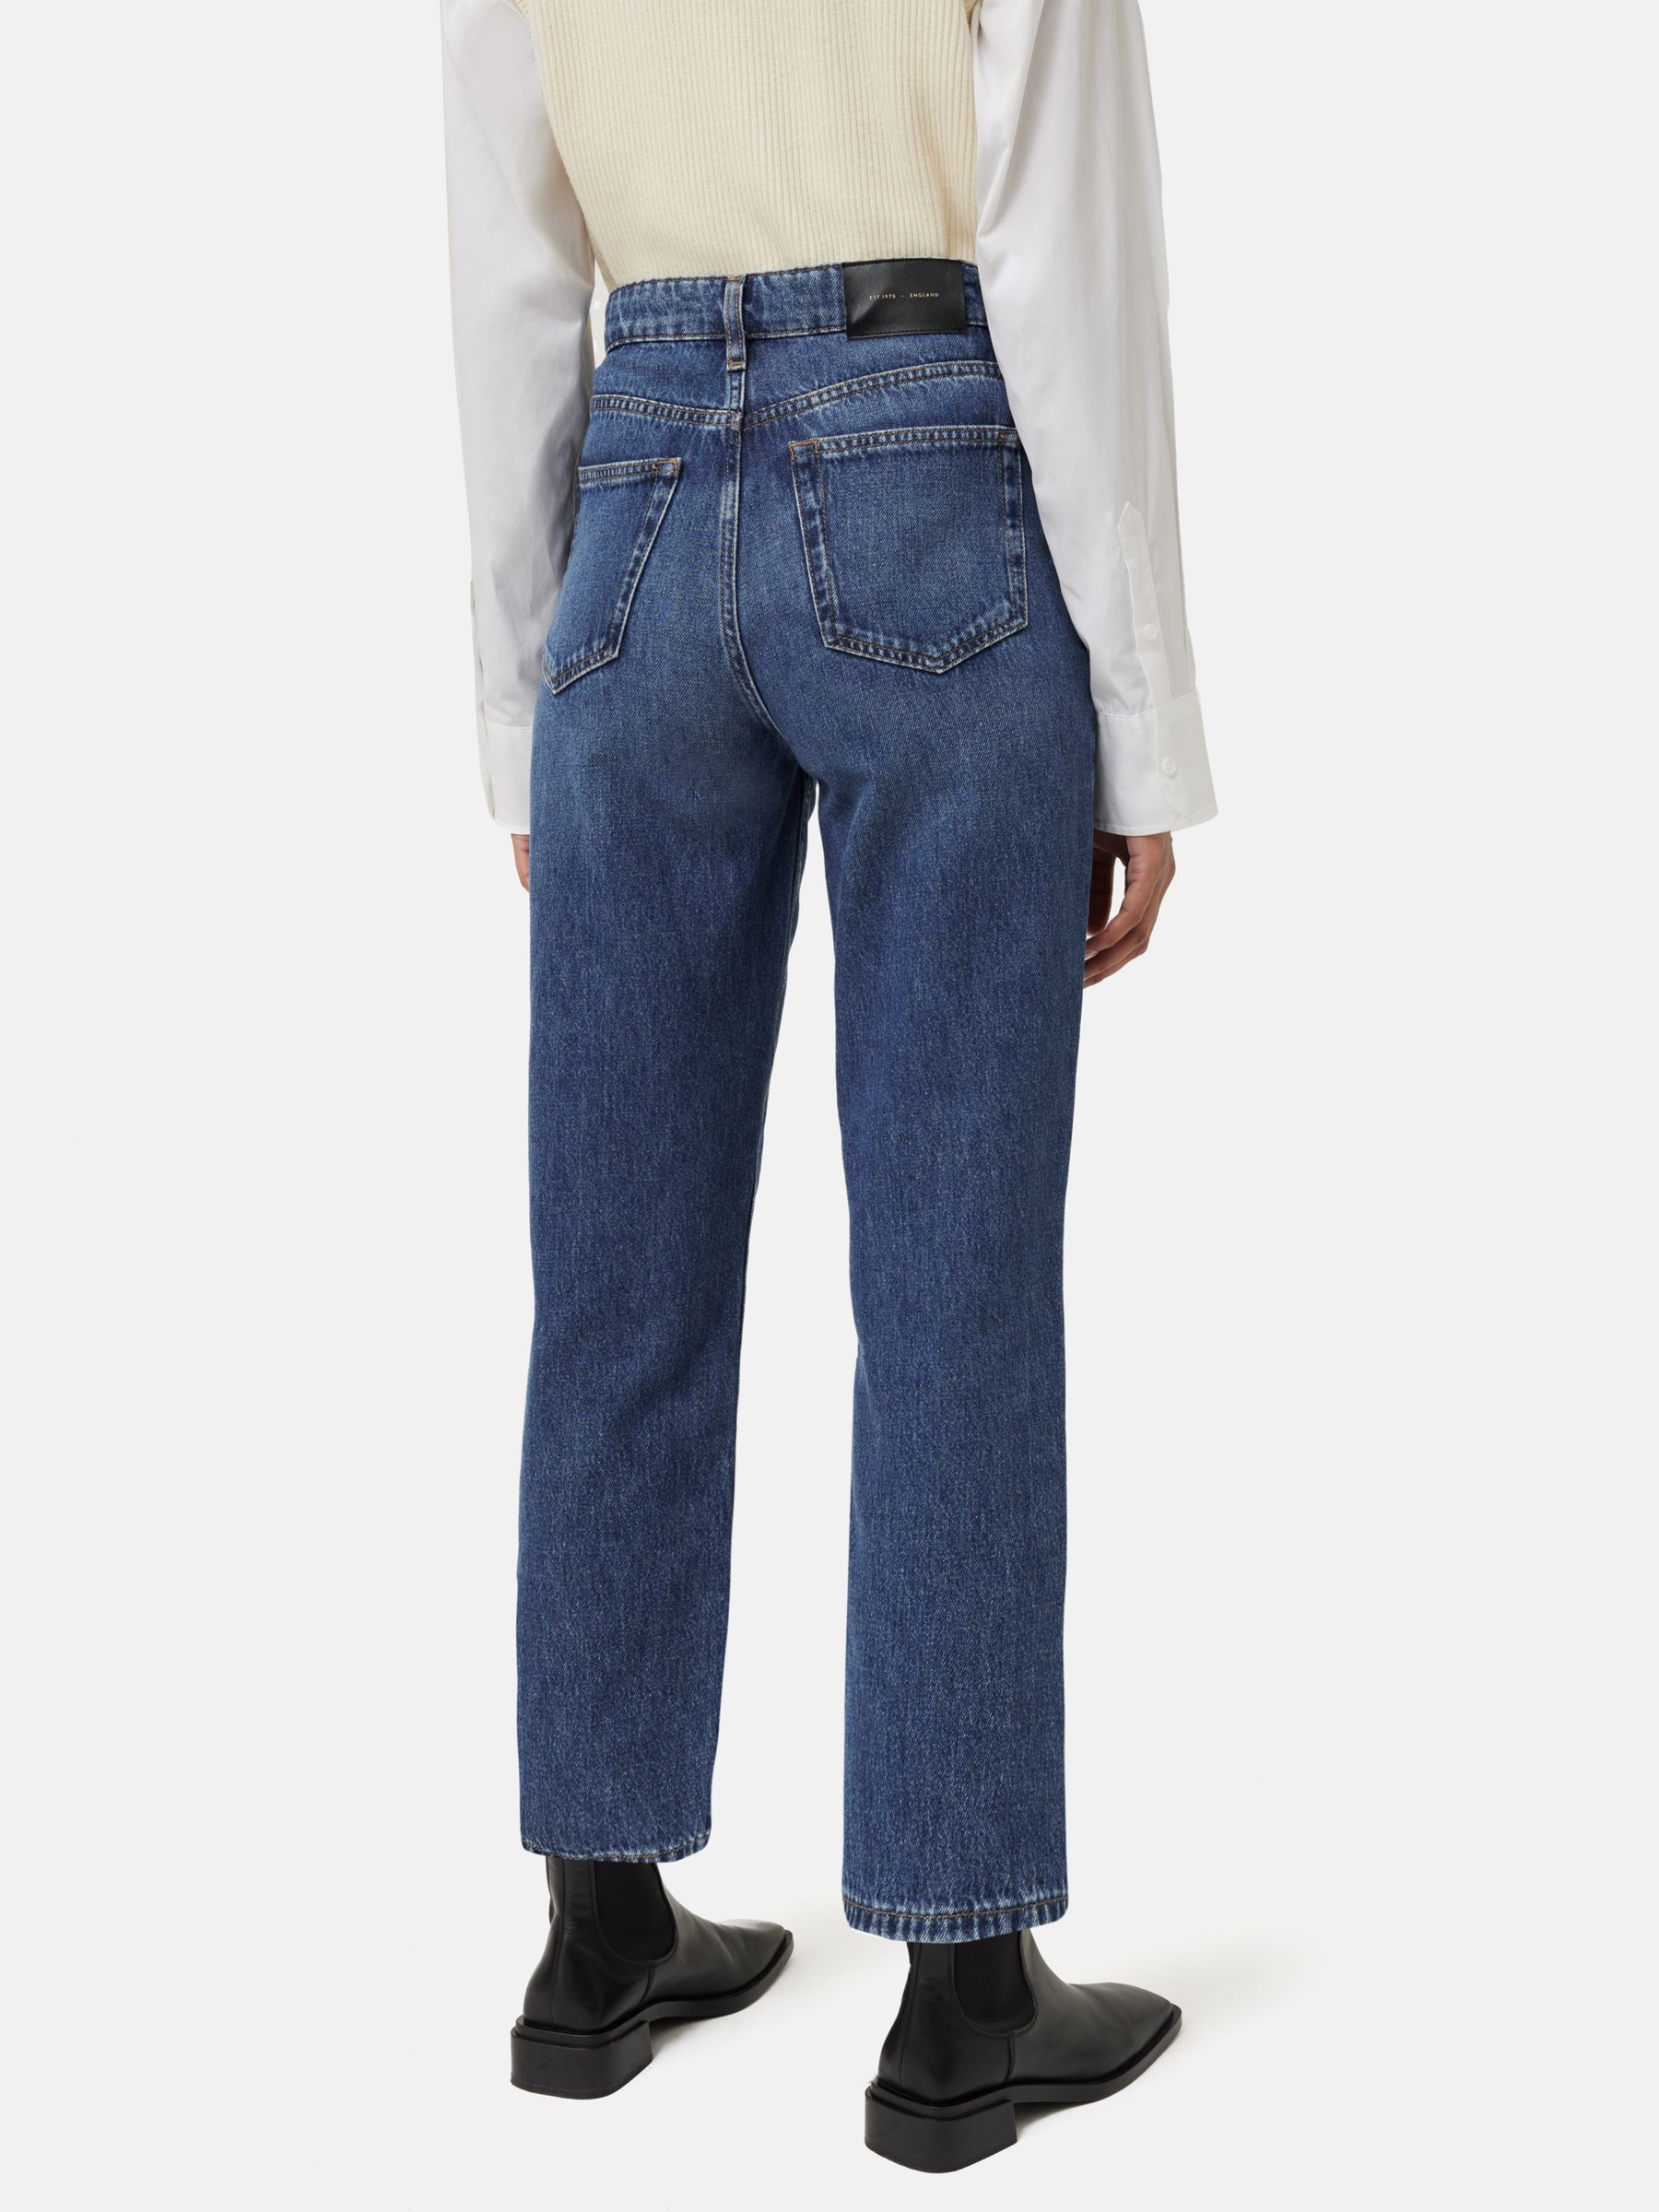 Buy Jigsaw Delmont Jeans Online at johnlewis.com